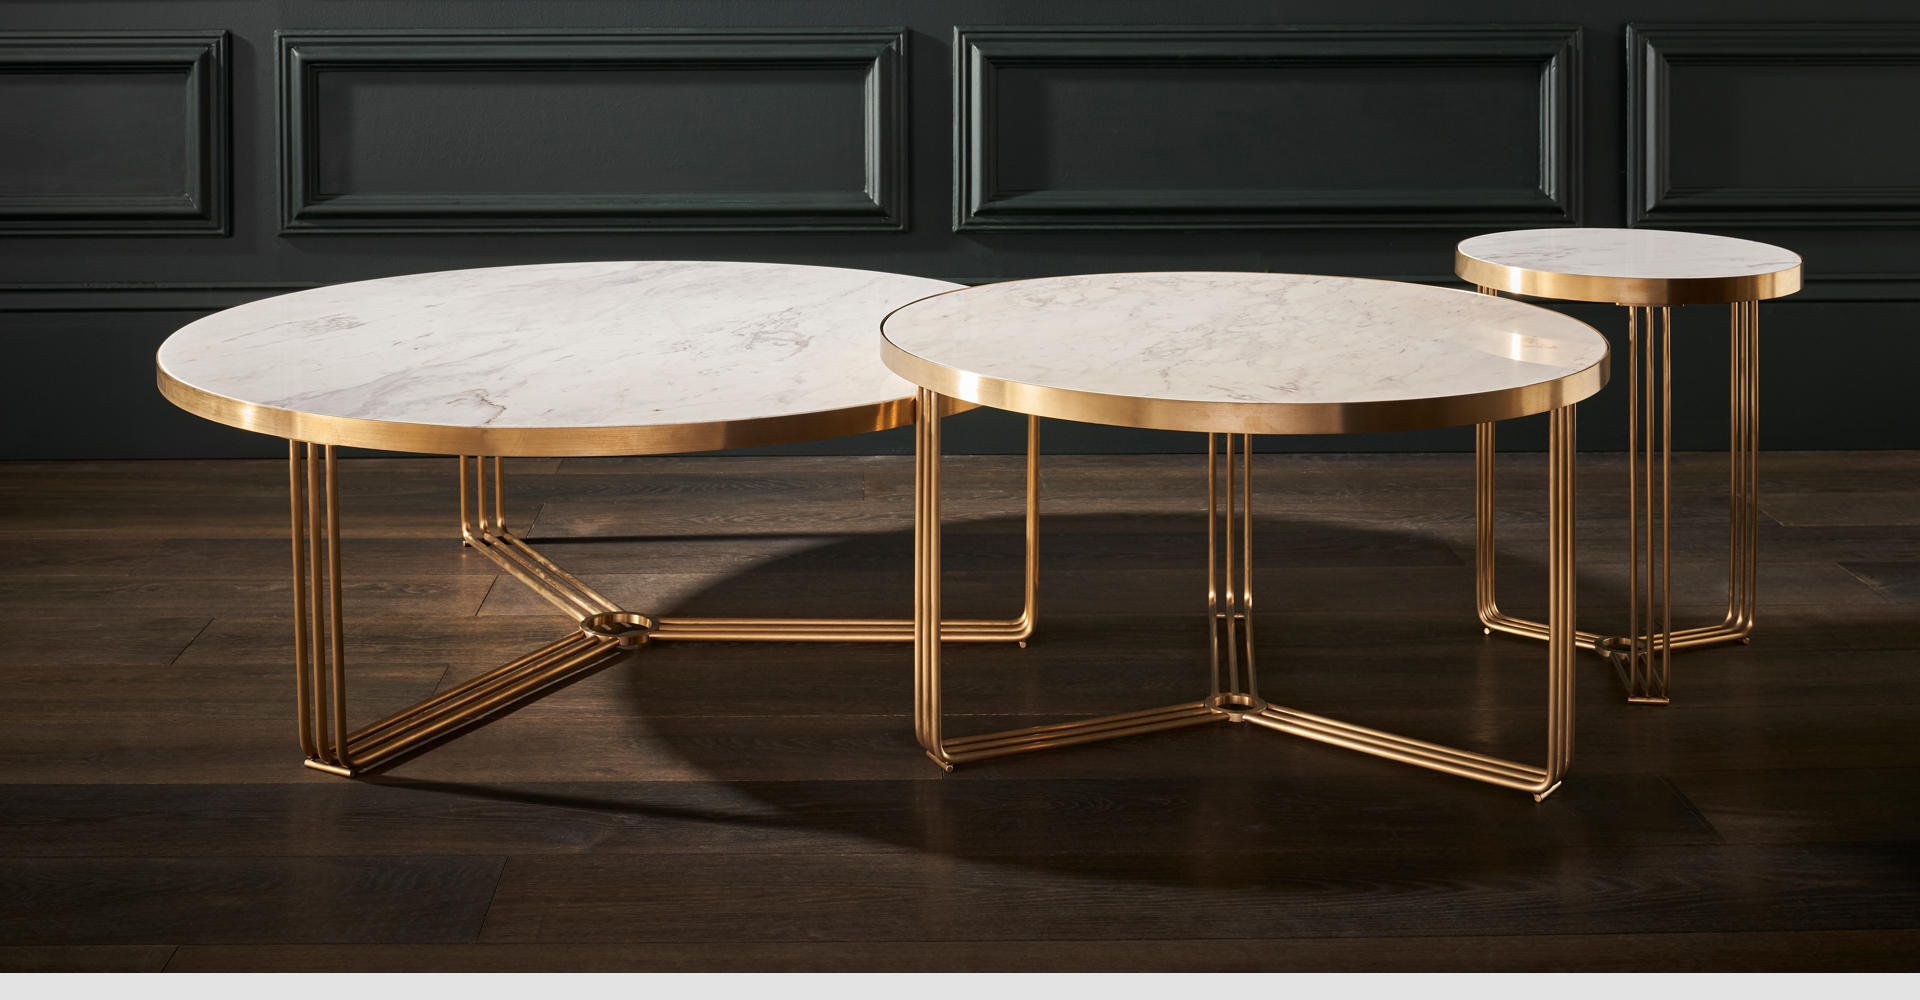 Finn Nested Coffee & Side Tables With Brushed Brass Frames & White Marble Tops © GillmoreSPACE Ltd